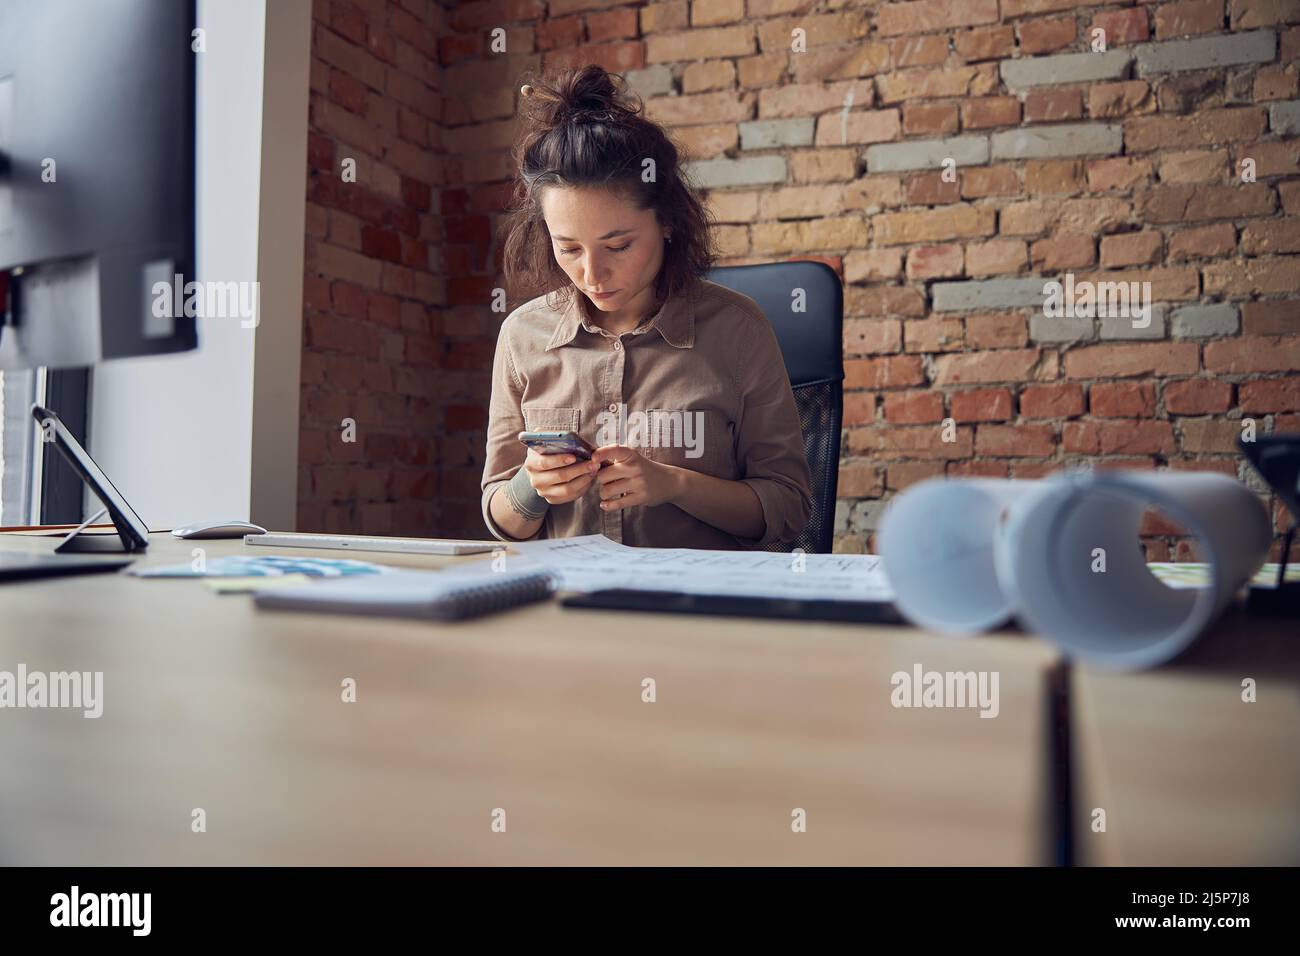 Female interior designer using smartphone while working in her office Stock Photo